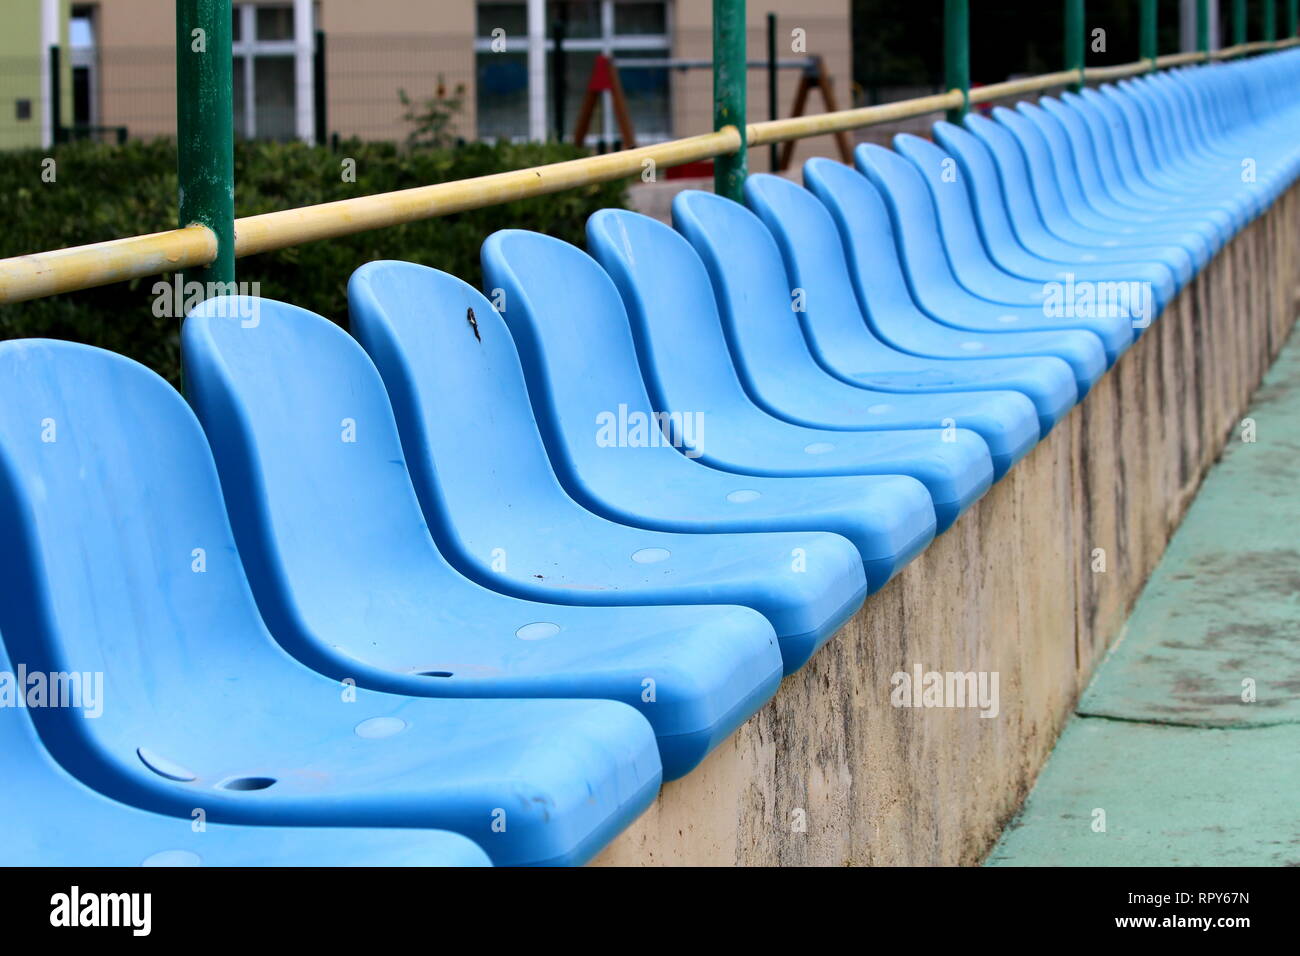 Row of new blue plastic seats mounted on top of concrete bleachers with metal fence and garden vegetation in background next to basketball court Stock Photo